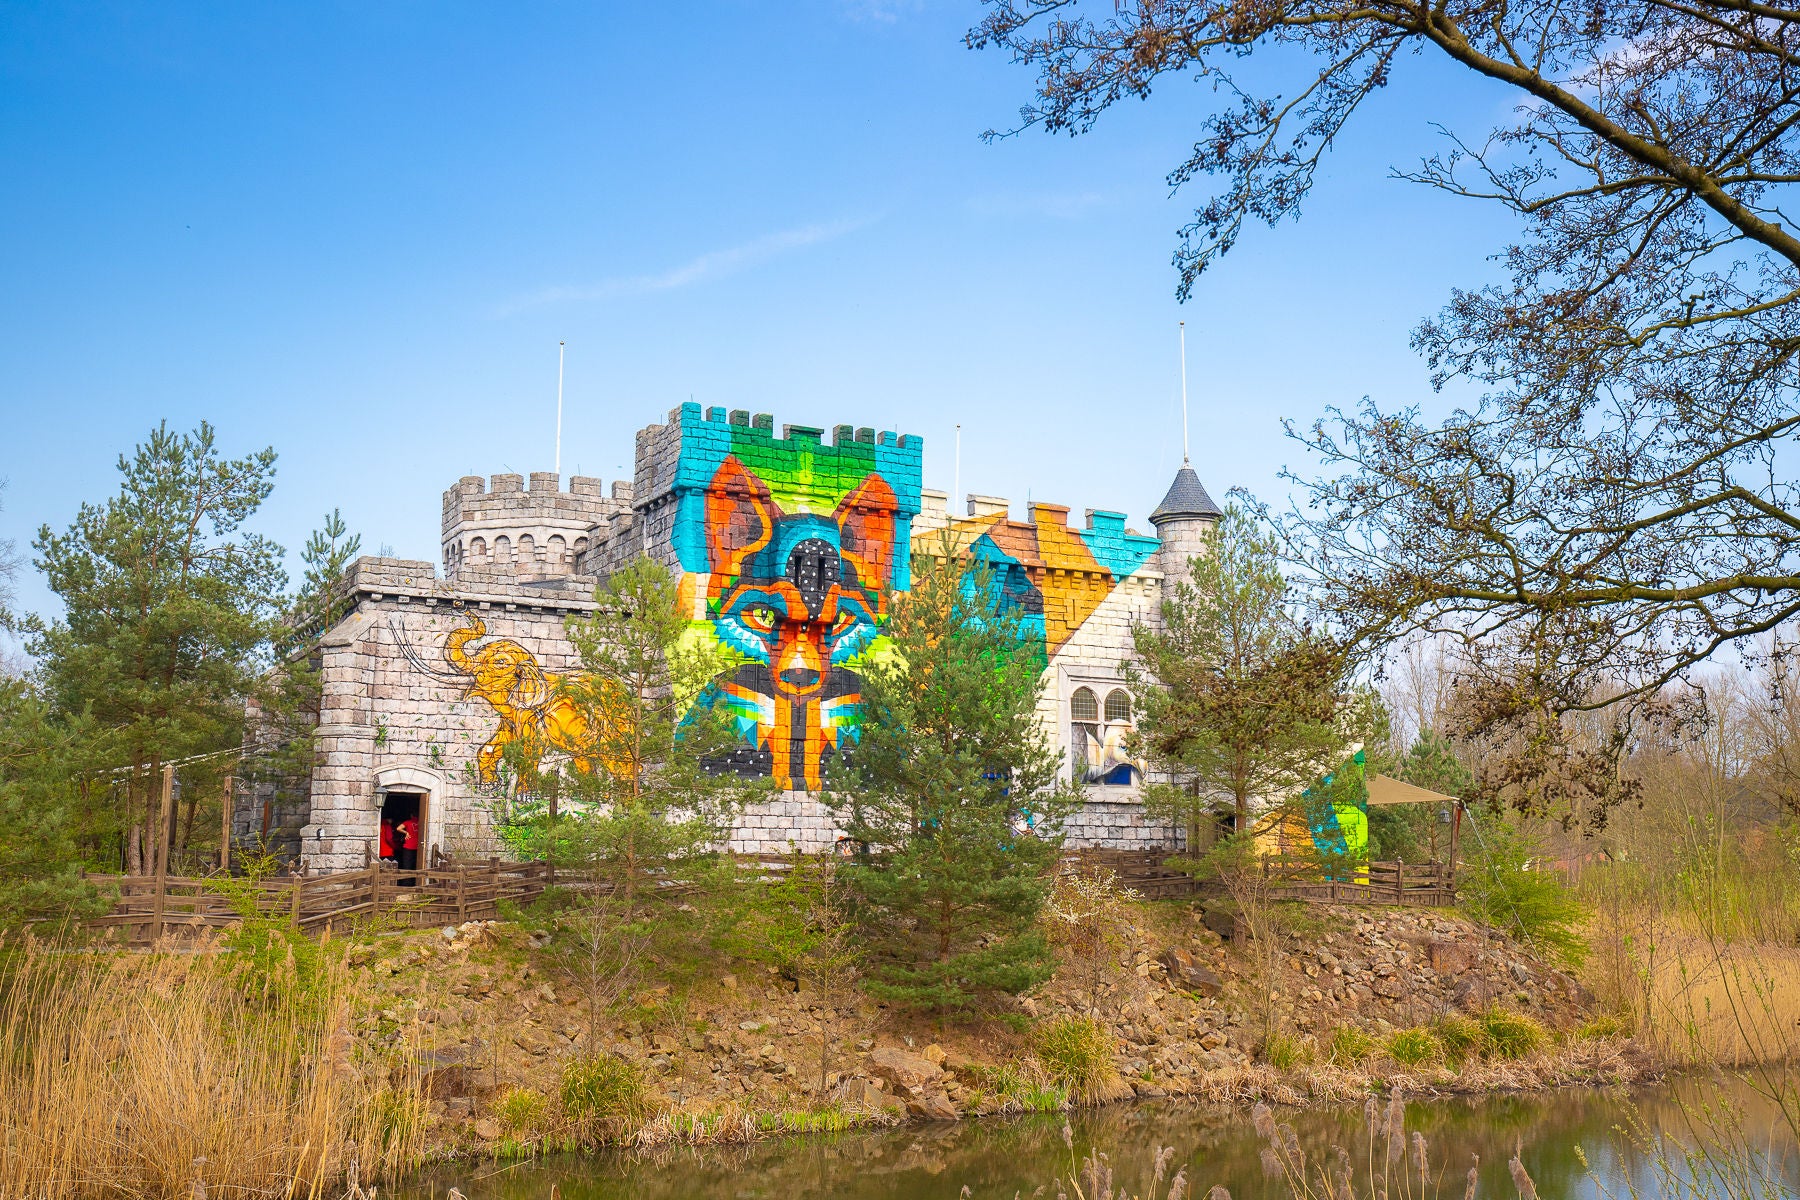 Merlin's magic castle an immersive attraction in Walibi Holland